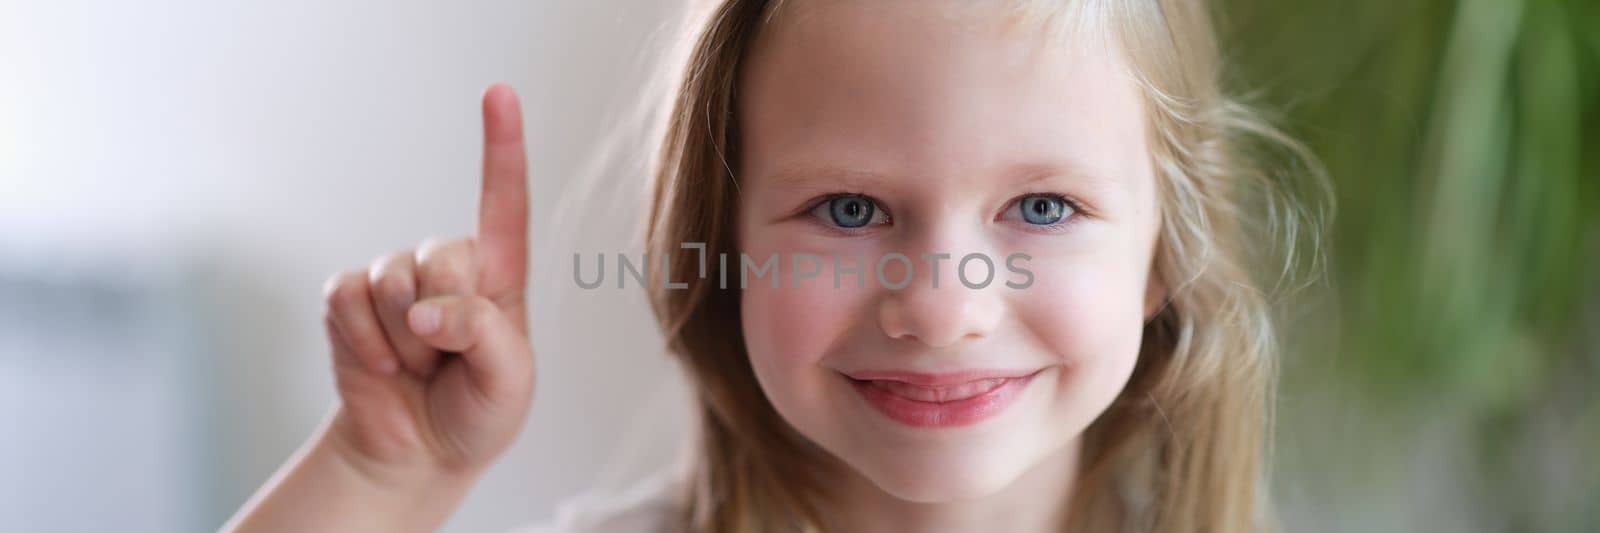 Portrait of beautiful little smiling baby girl holding thumbs up. Creative creative baby ideas concept